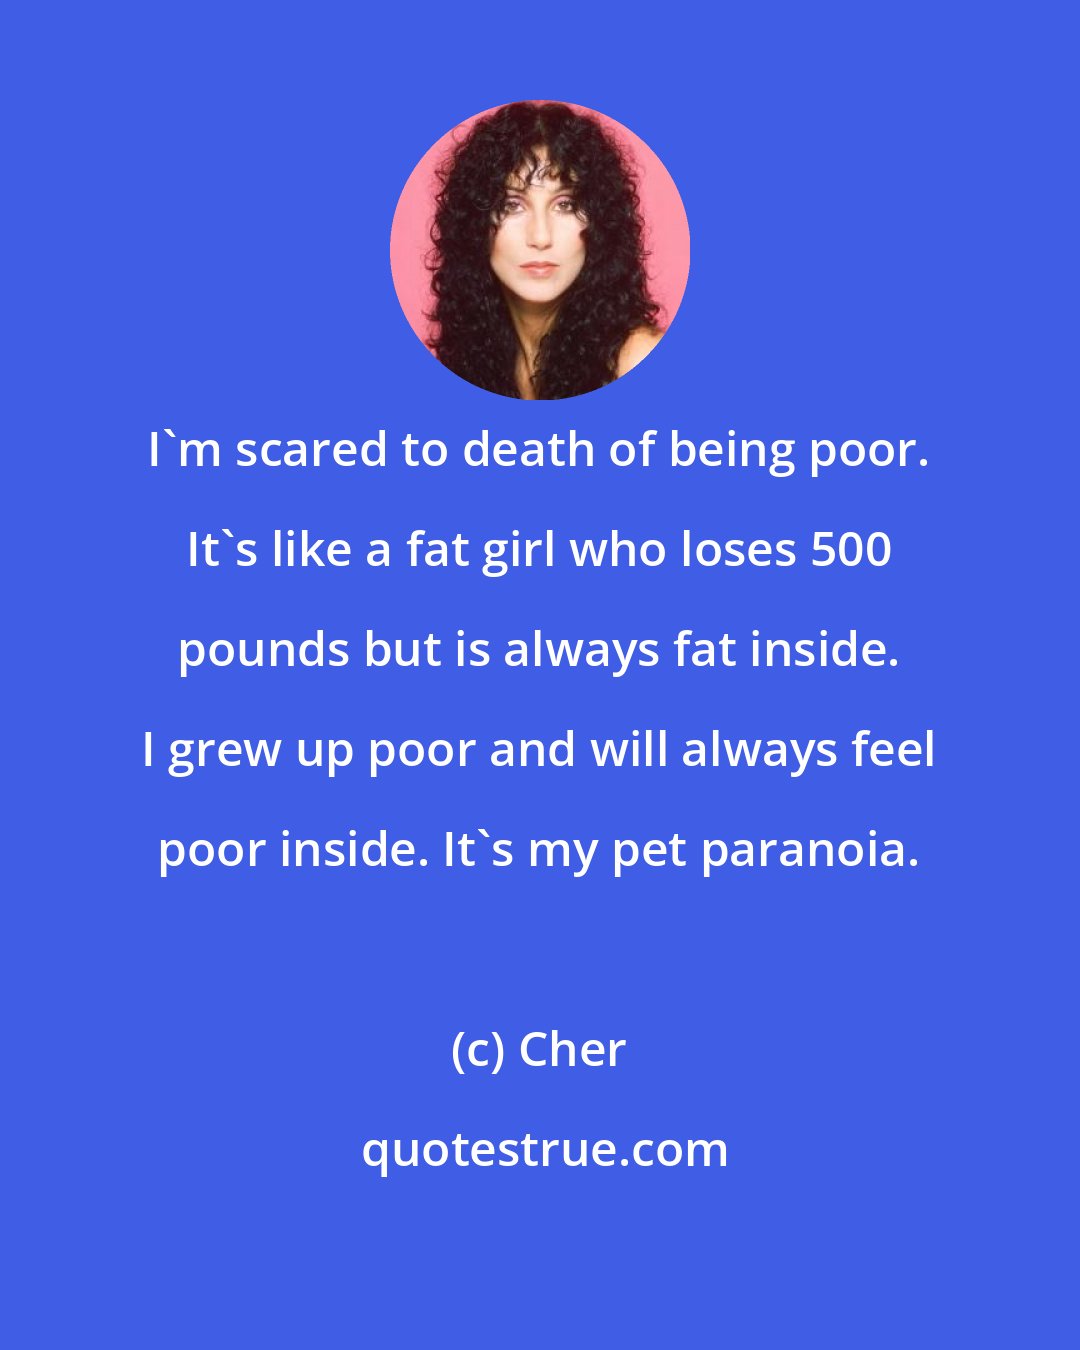 Cher: I'm scared to death of being poor. It's like a fat girl who loses 500 pounds but is always fat inside. I grew up poor and will always feel poor inside. It's my pet paranoia.